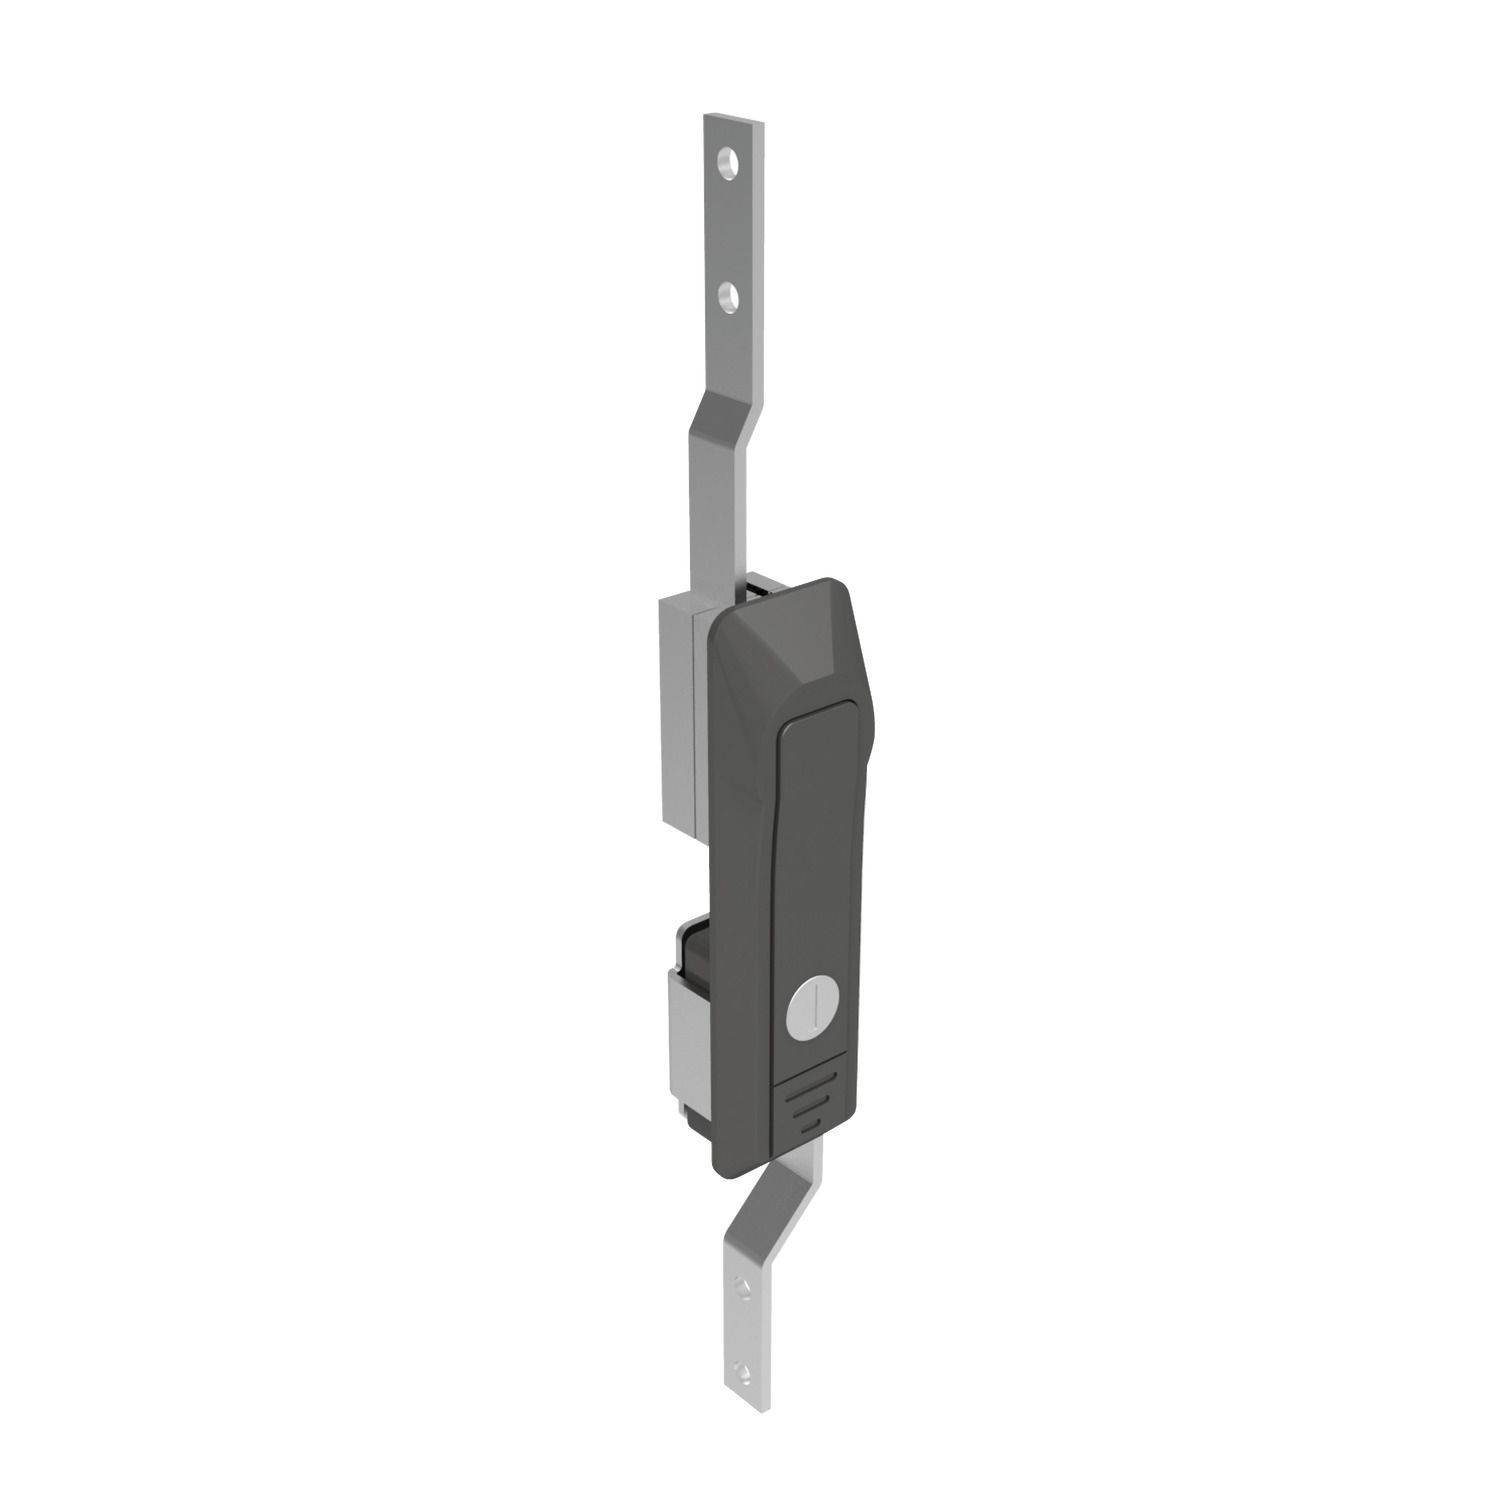 B2380 - Swing Handles - with Rod Control